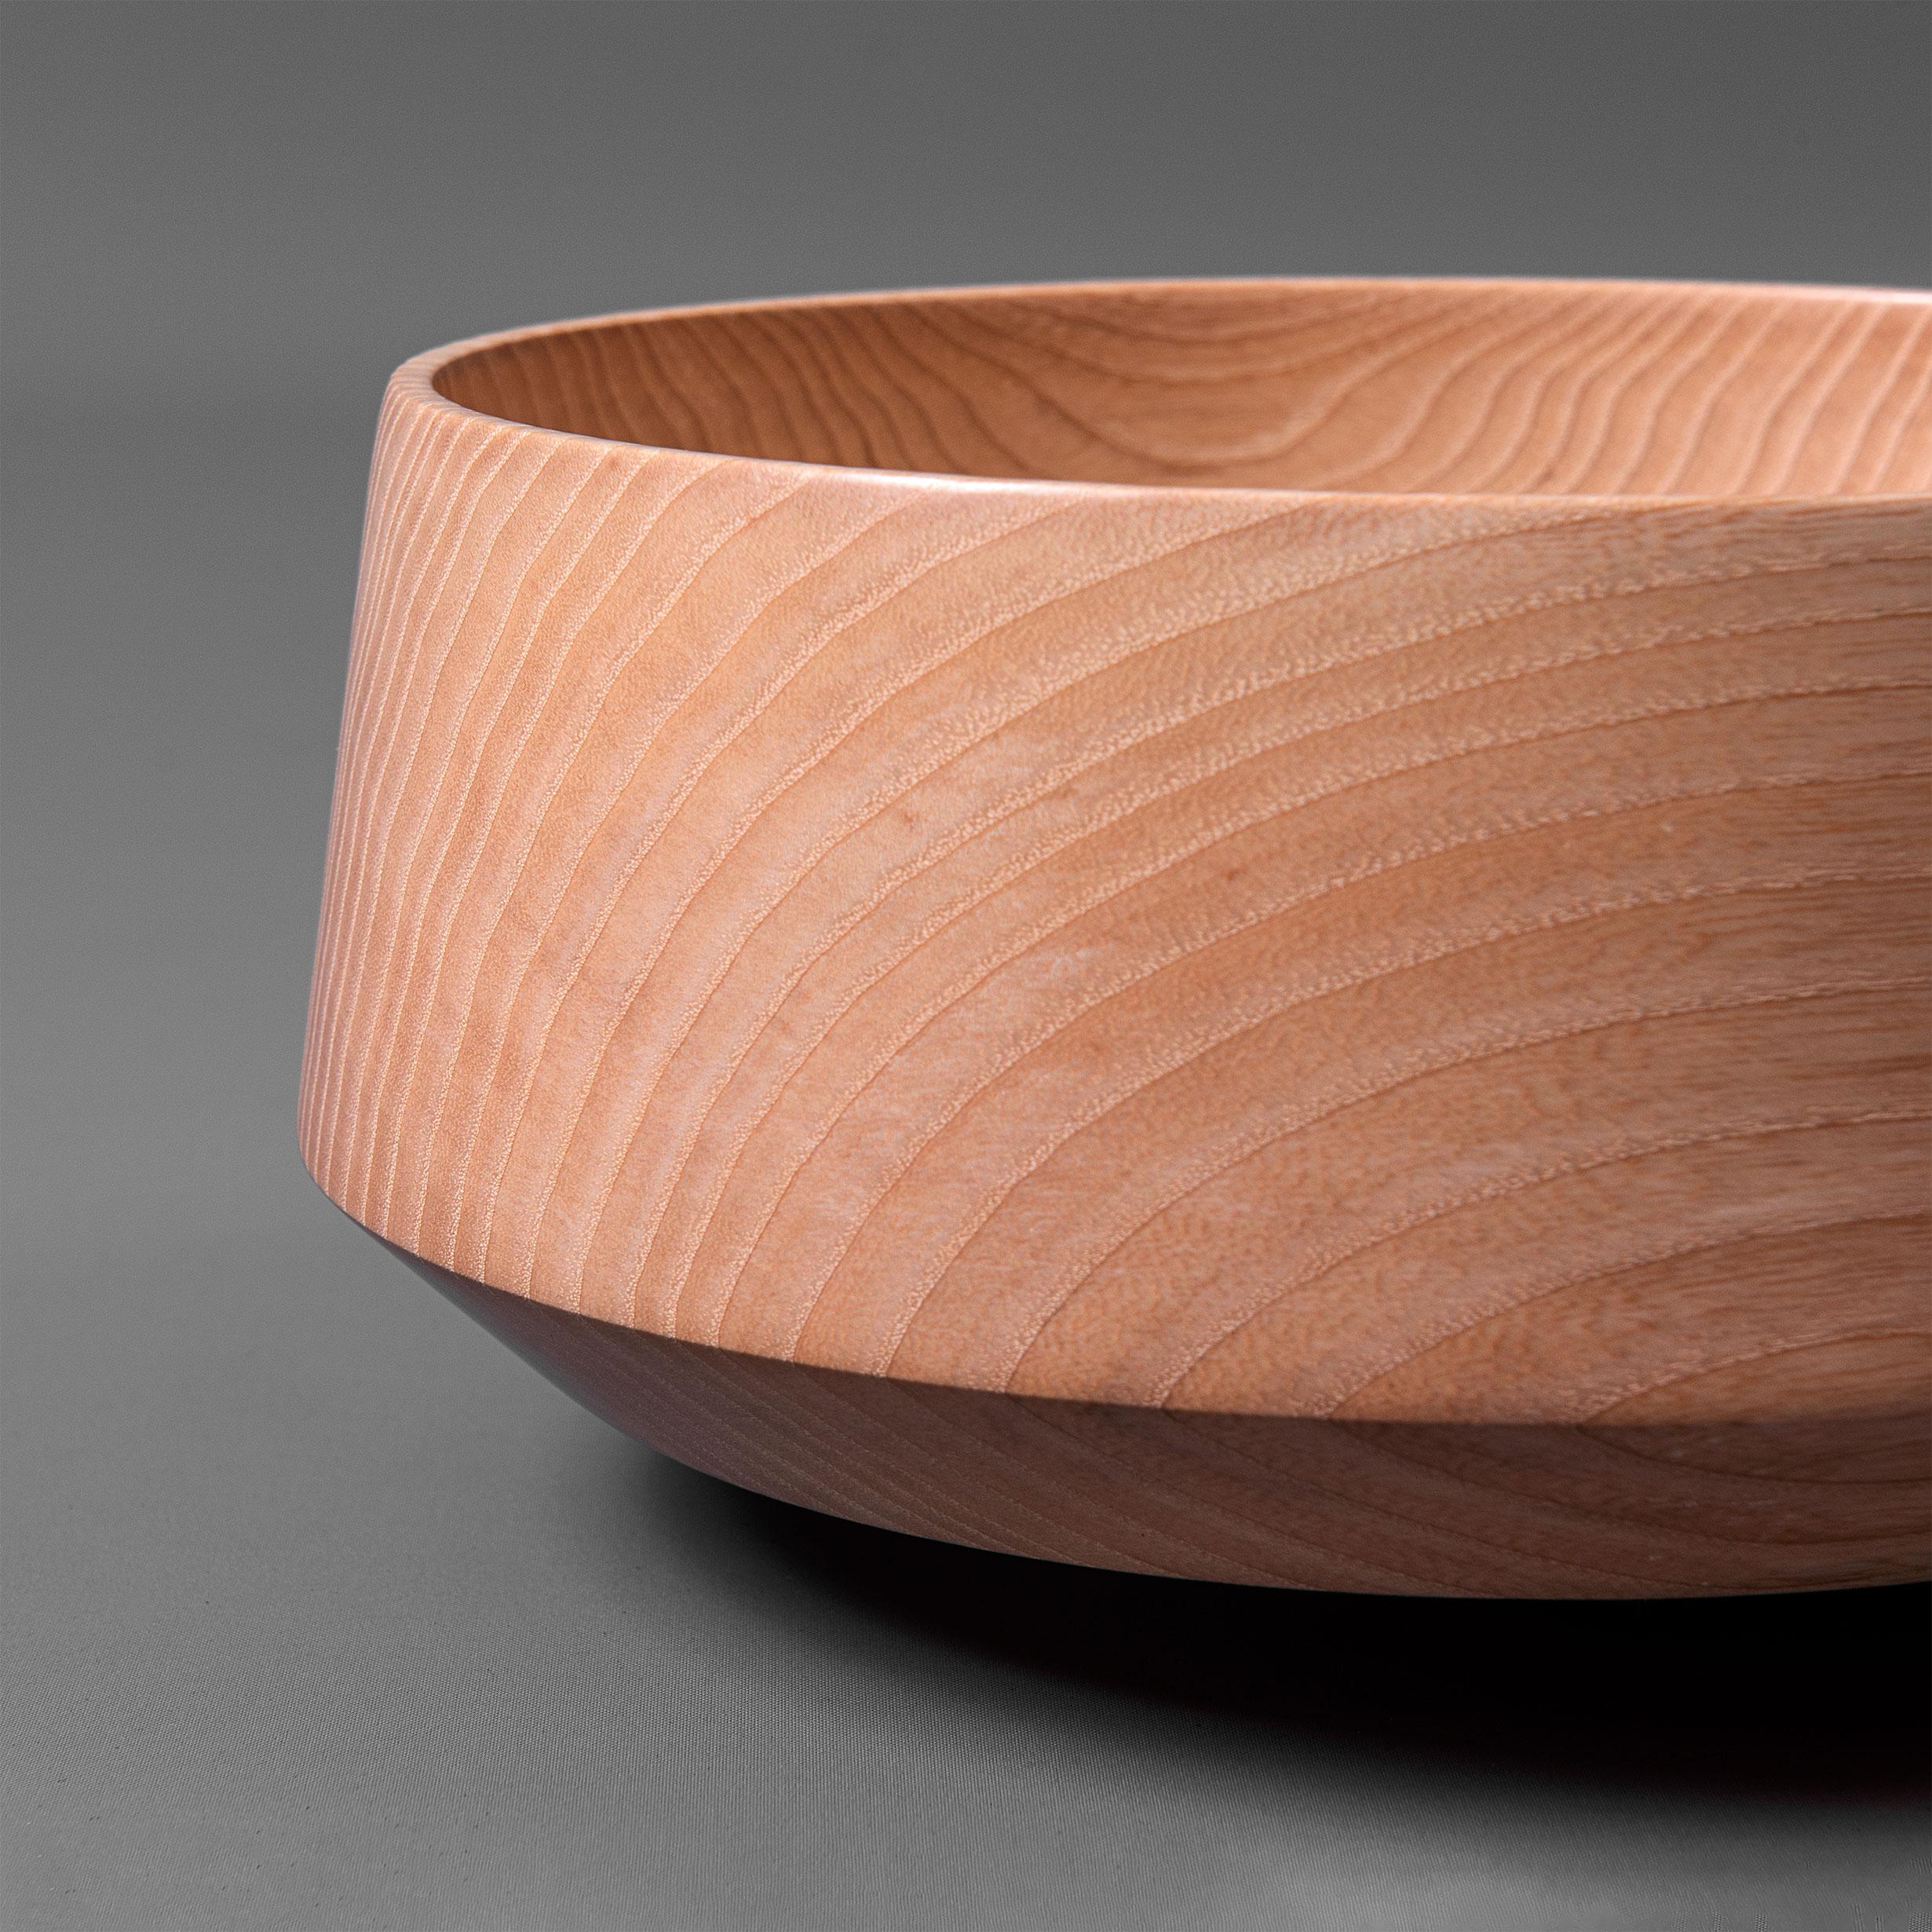 Fine traditionally hand-crafted and turned Ash Koben bowl. These are handmade to the very best quality in London, England.
Finished in food safe oils.
A beautiful and unique piece of handmade contemporary design with a technique that dates back